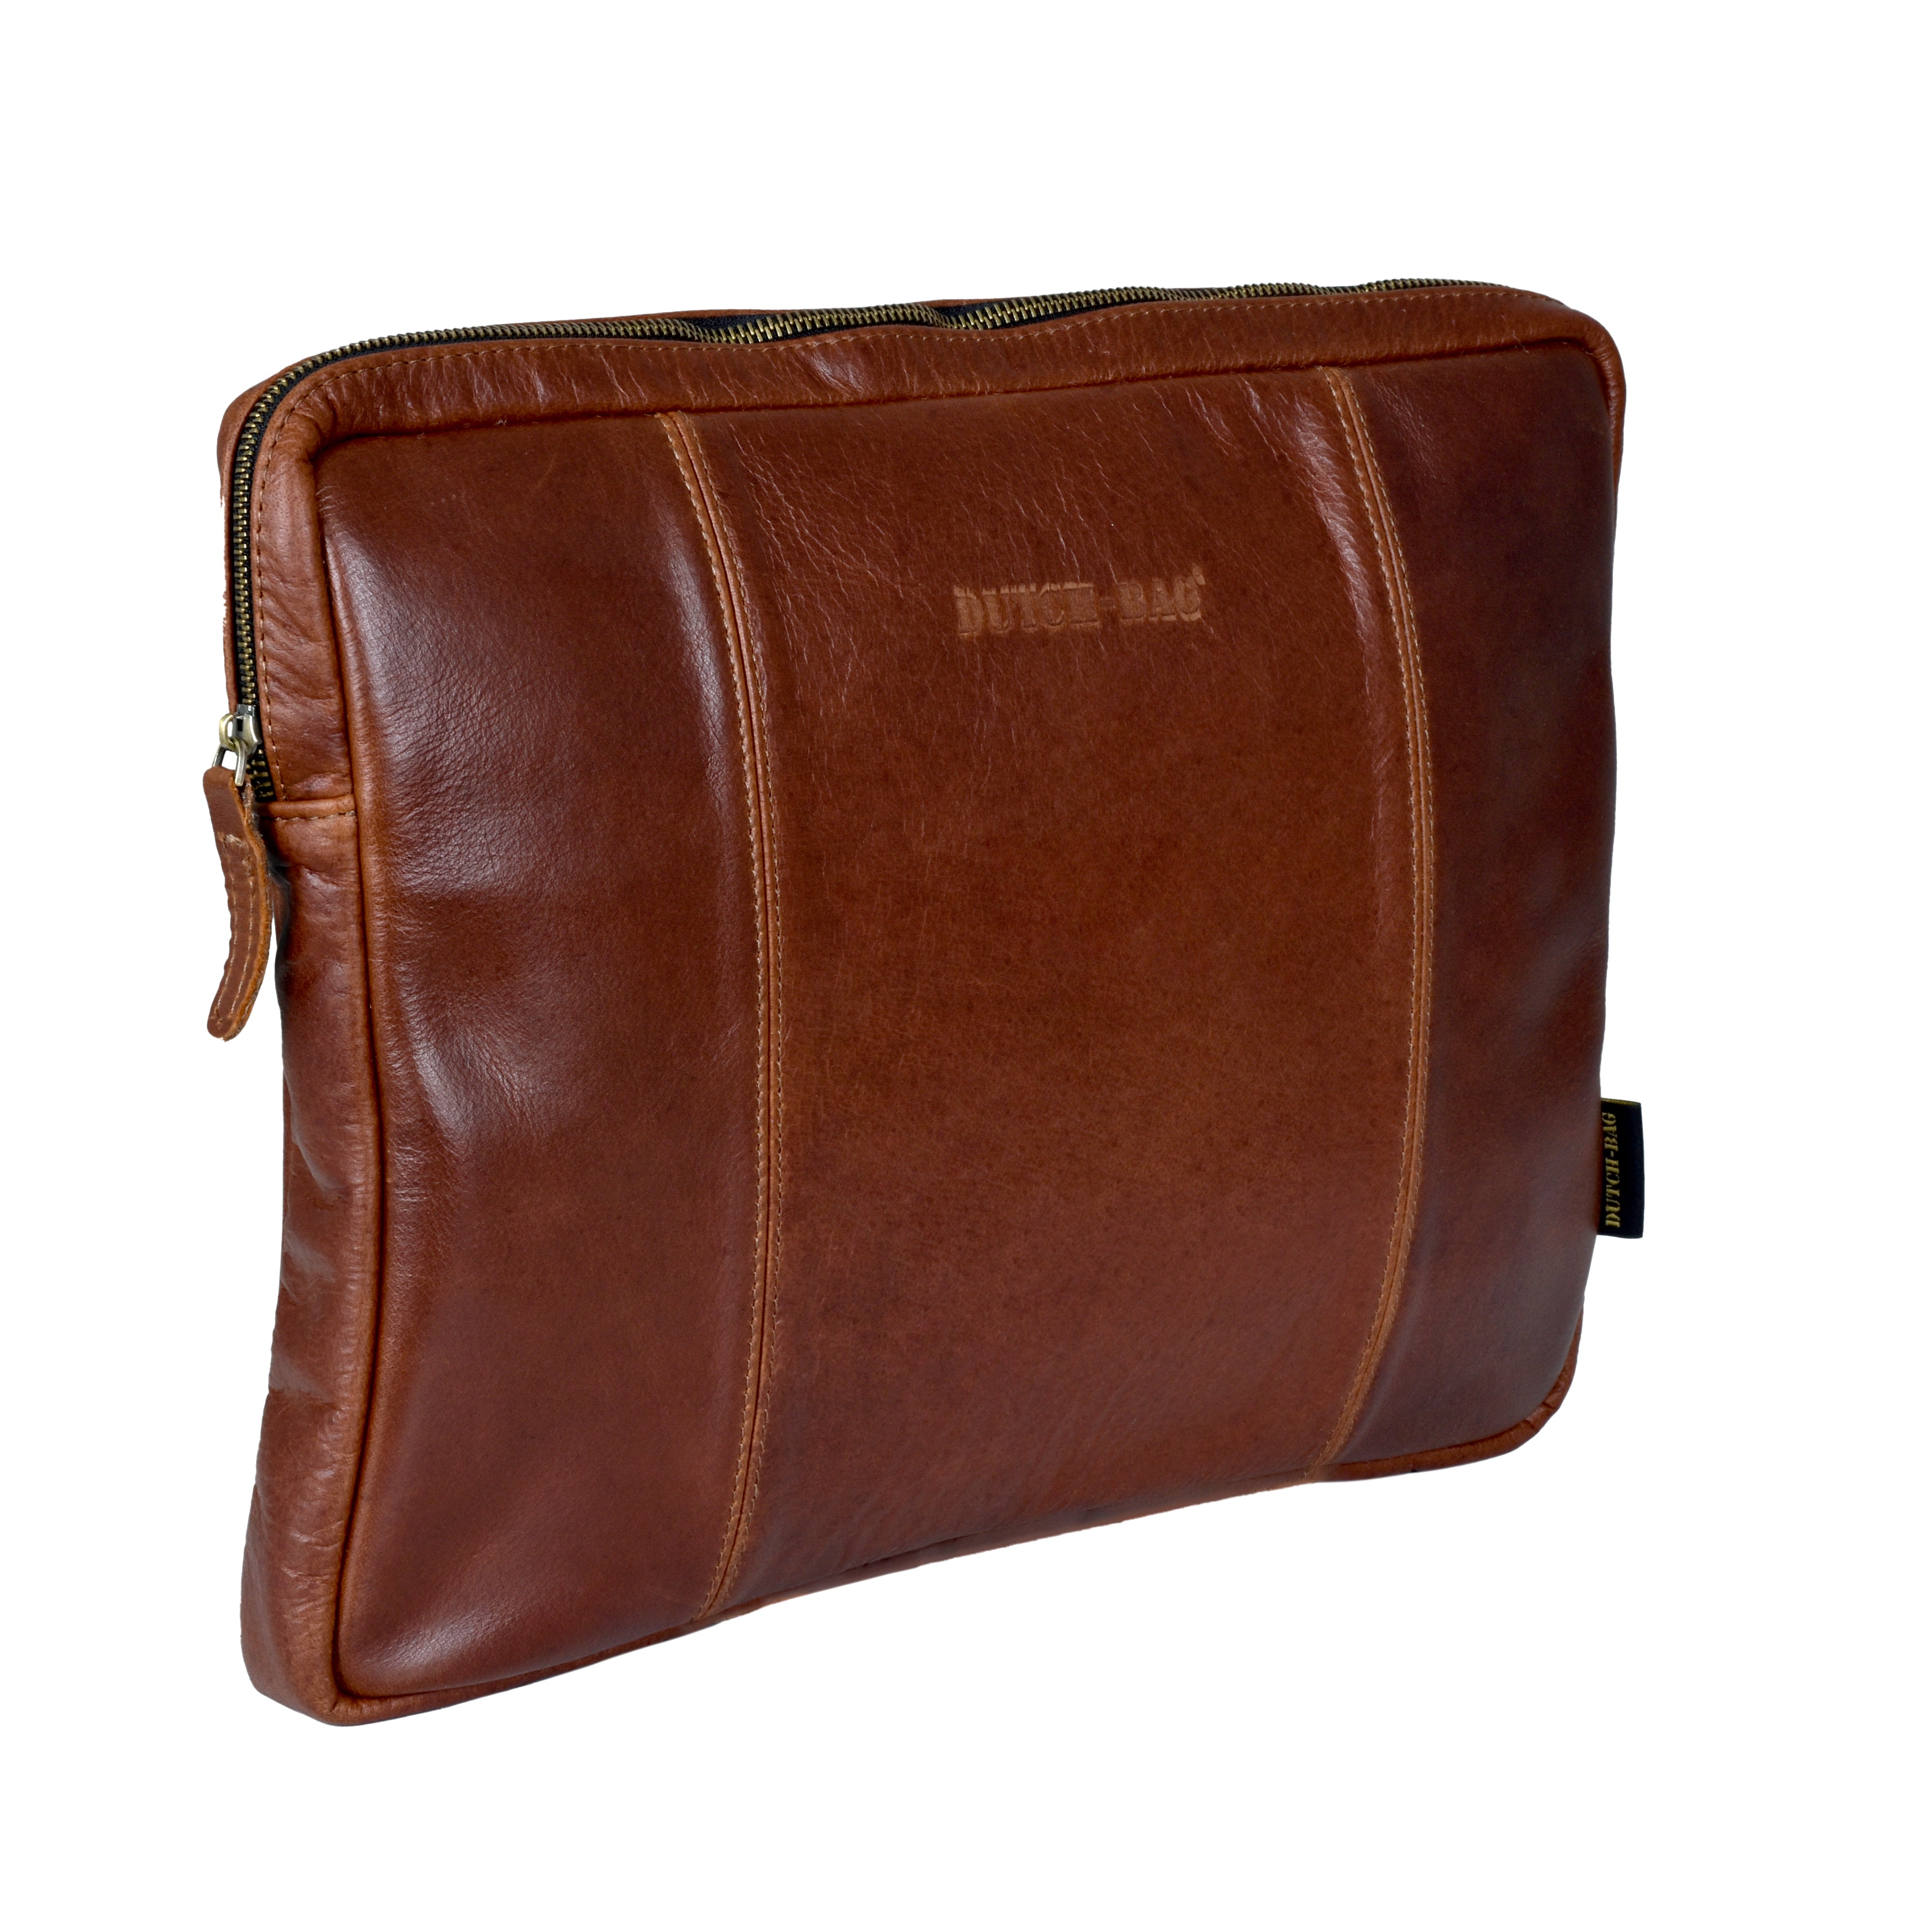 Leather Laptop Sleeve Wax Brown The Hague 14 inch